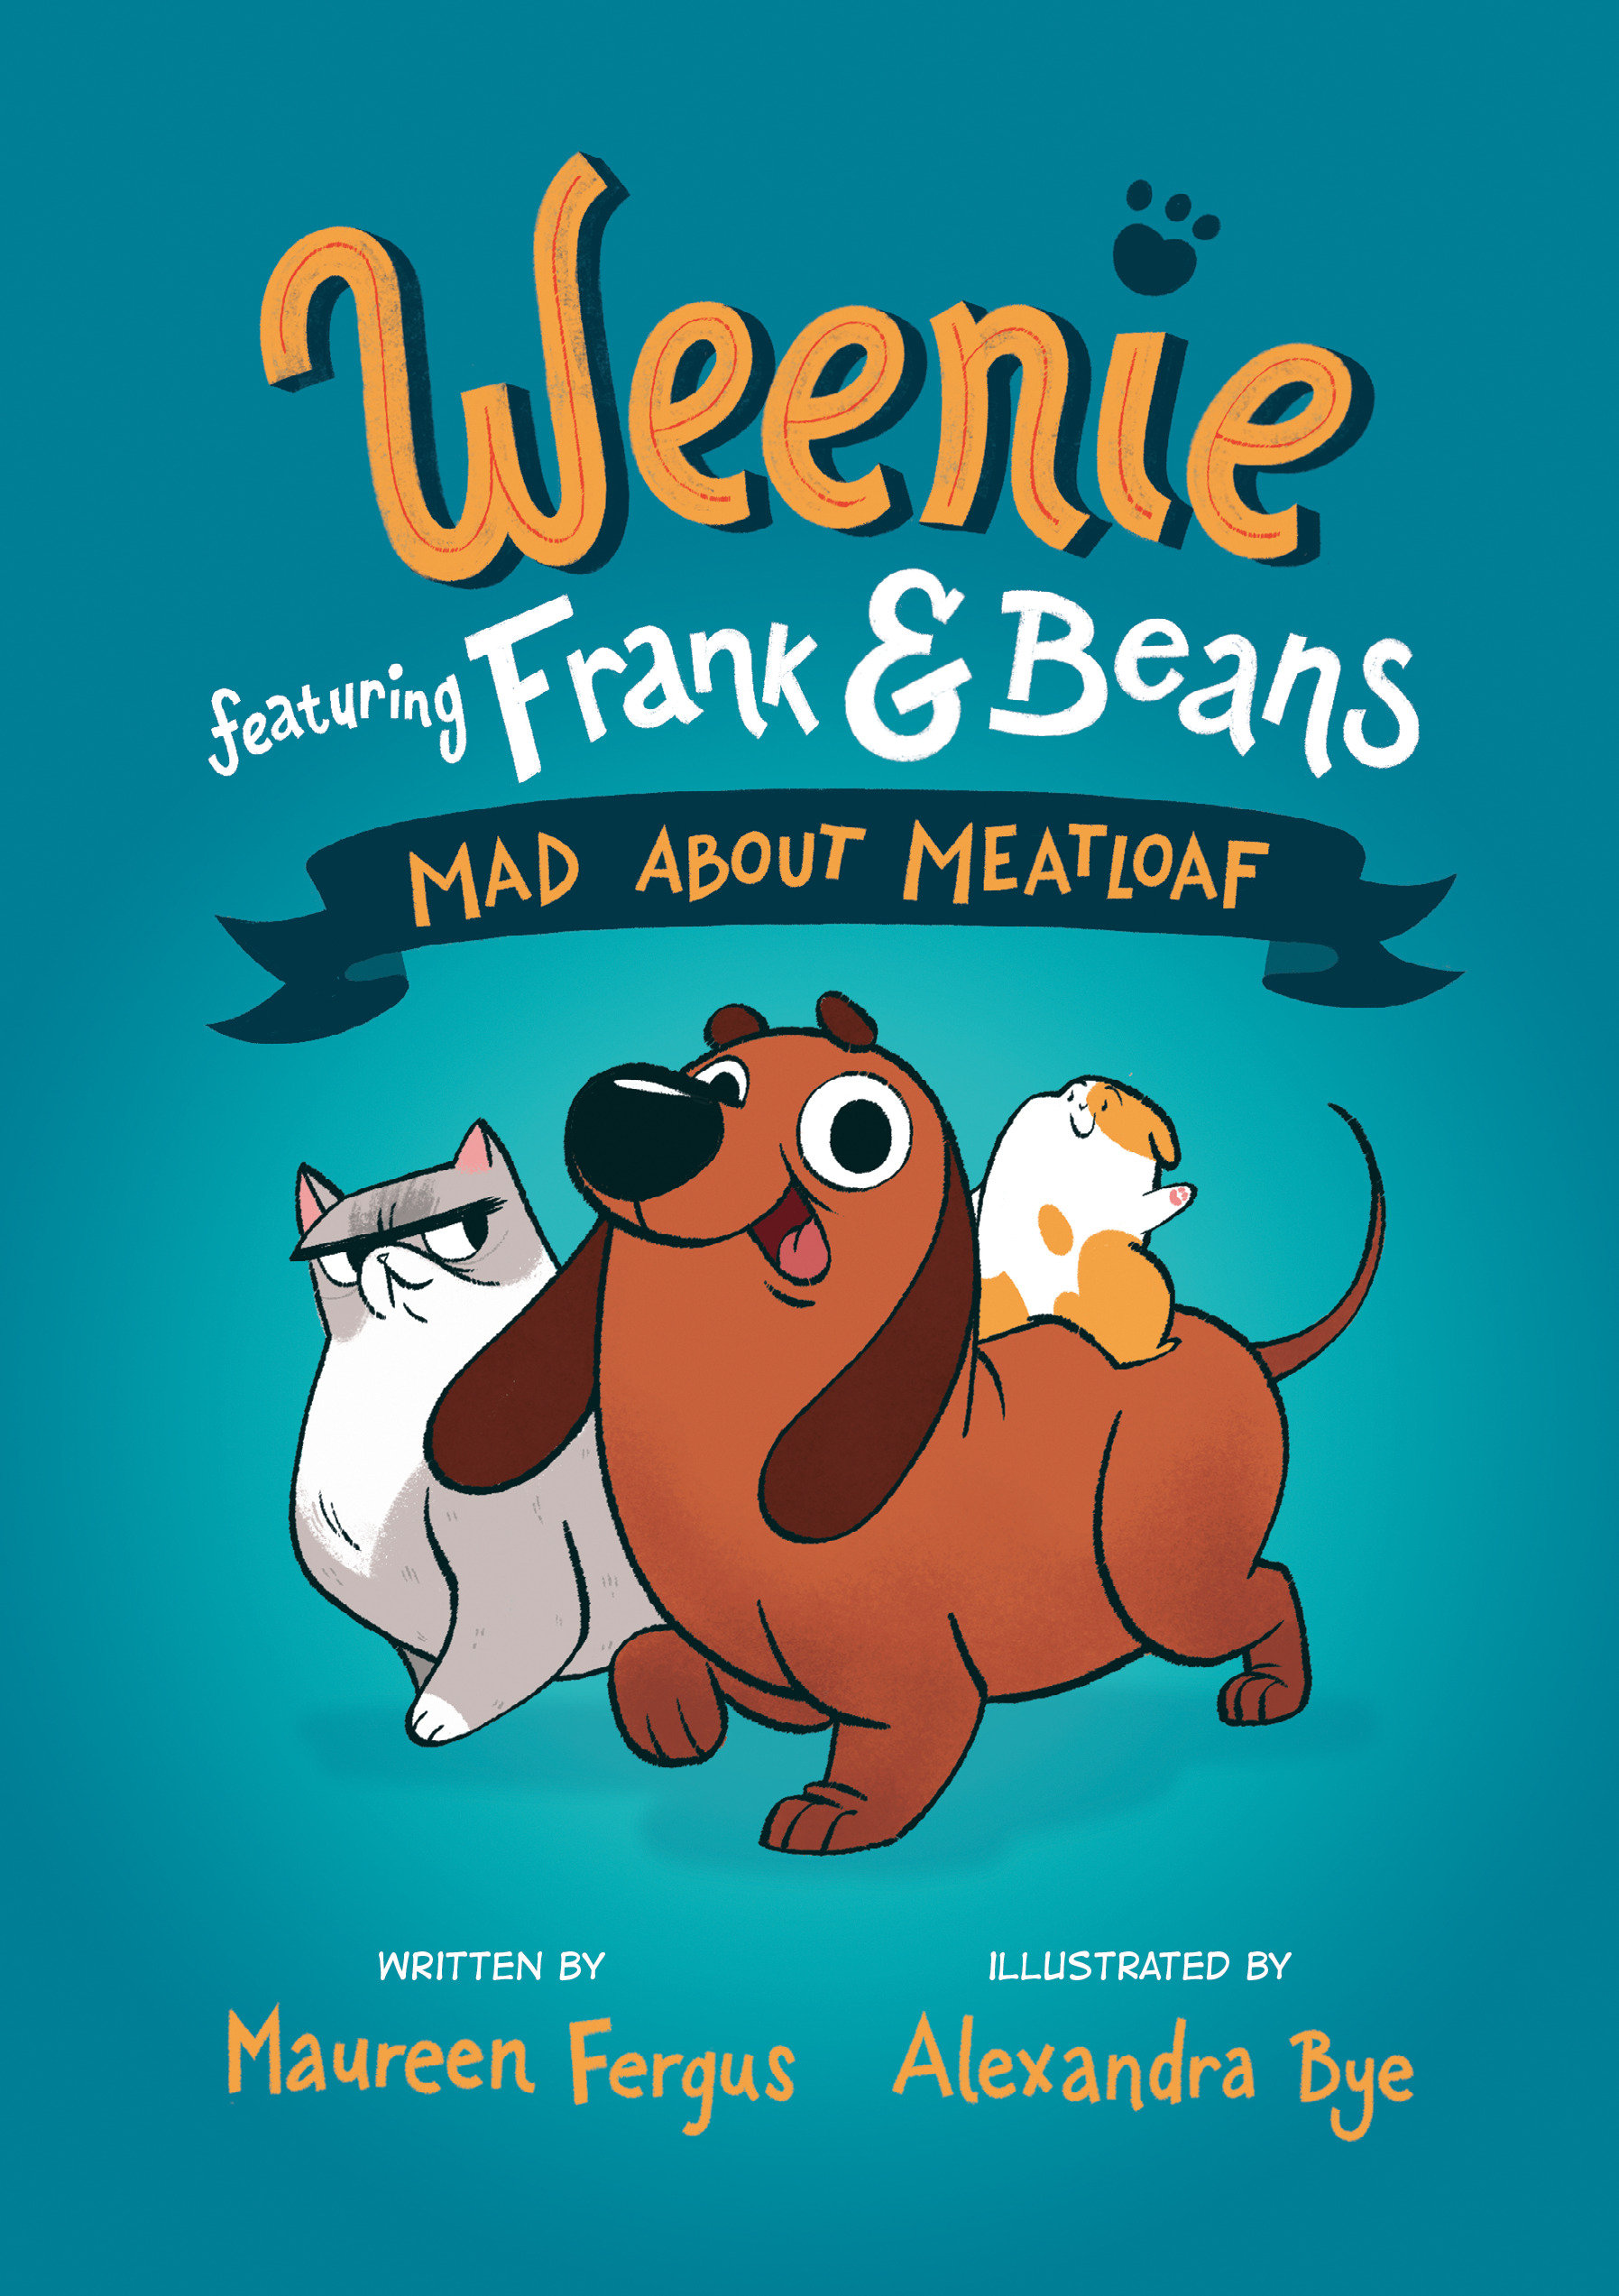 Weenie Featuring Frank & Beans Hardcover Graphic Novel Volume 1 Mad About Meatloaf